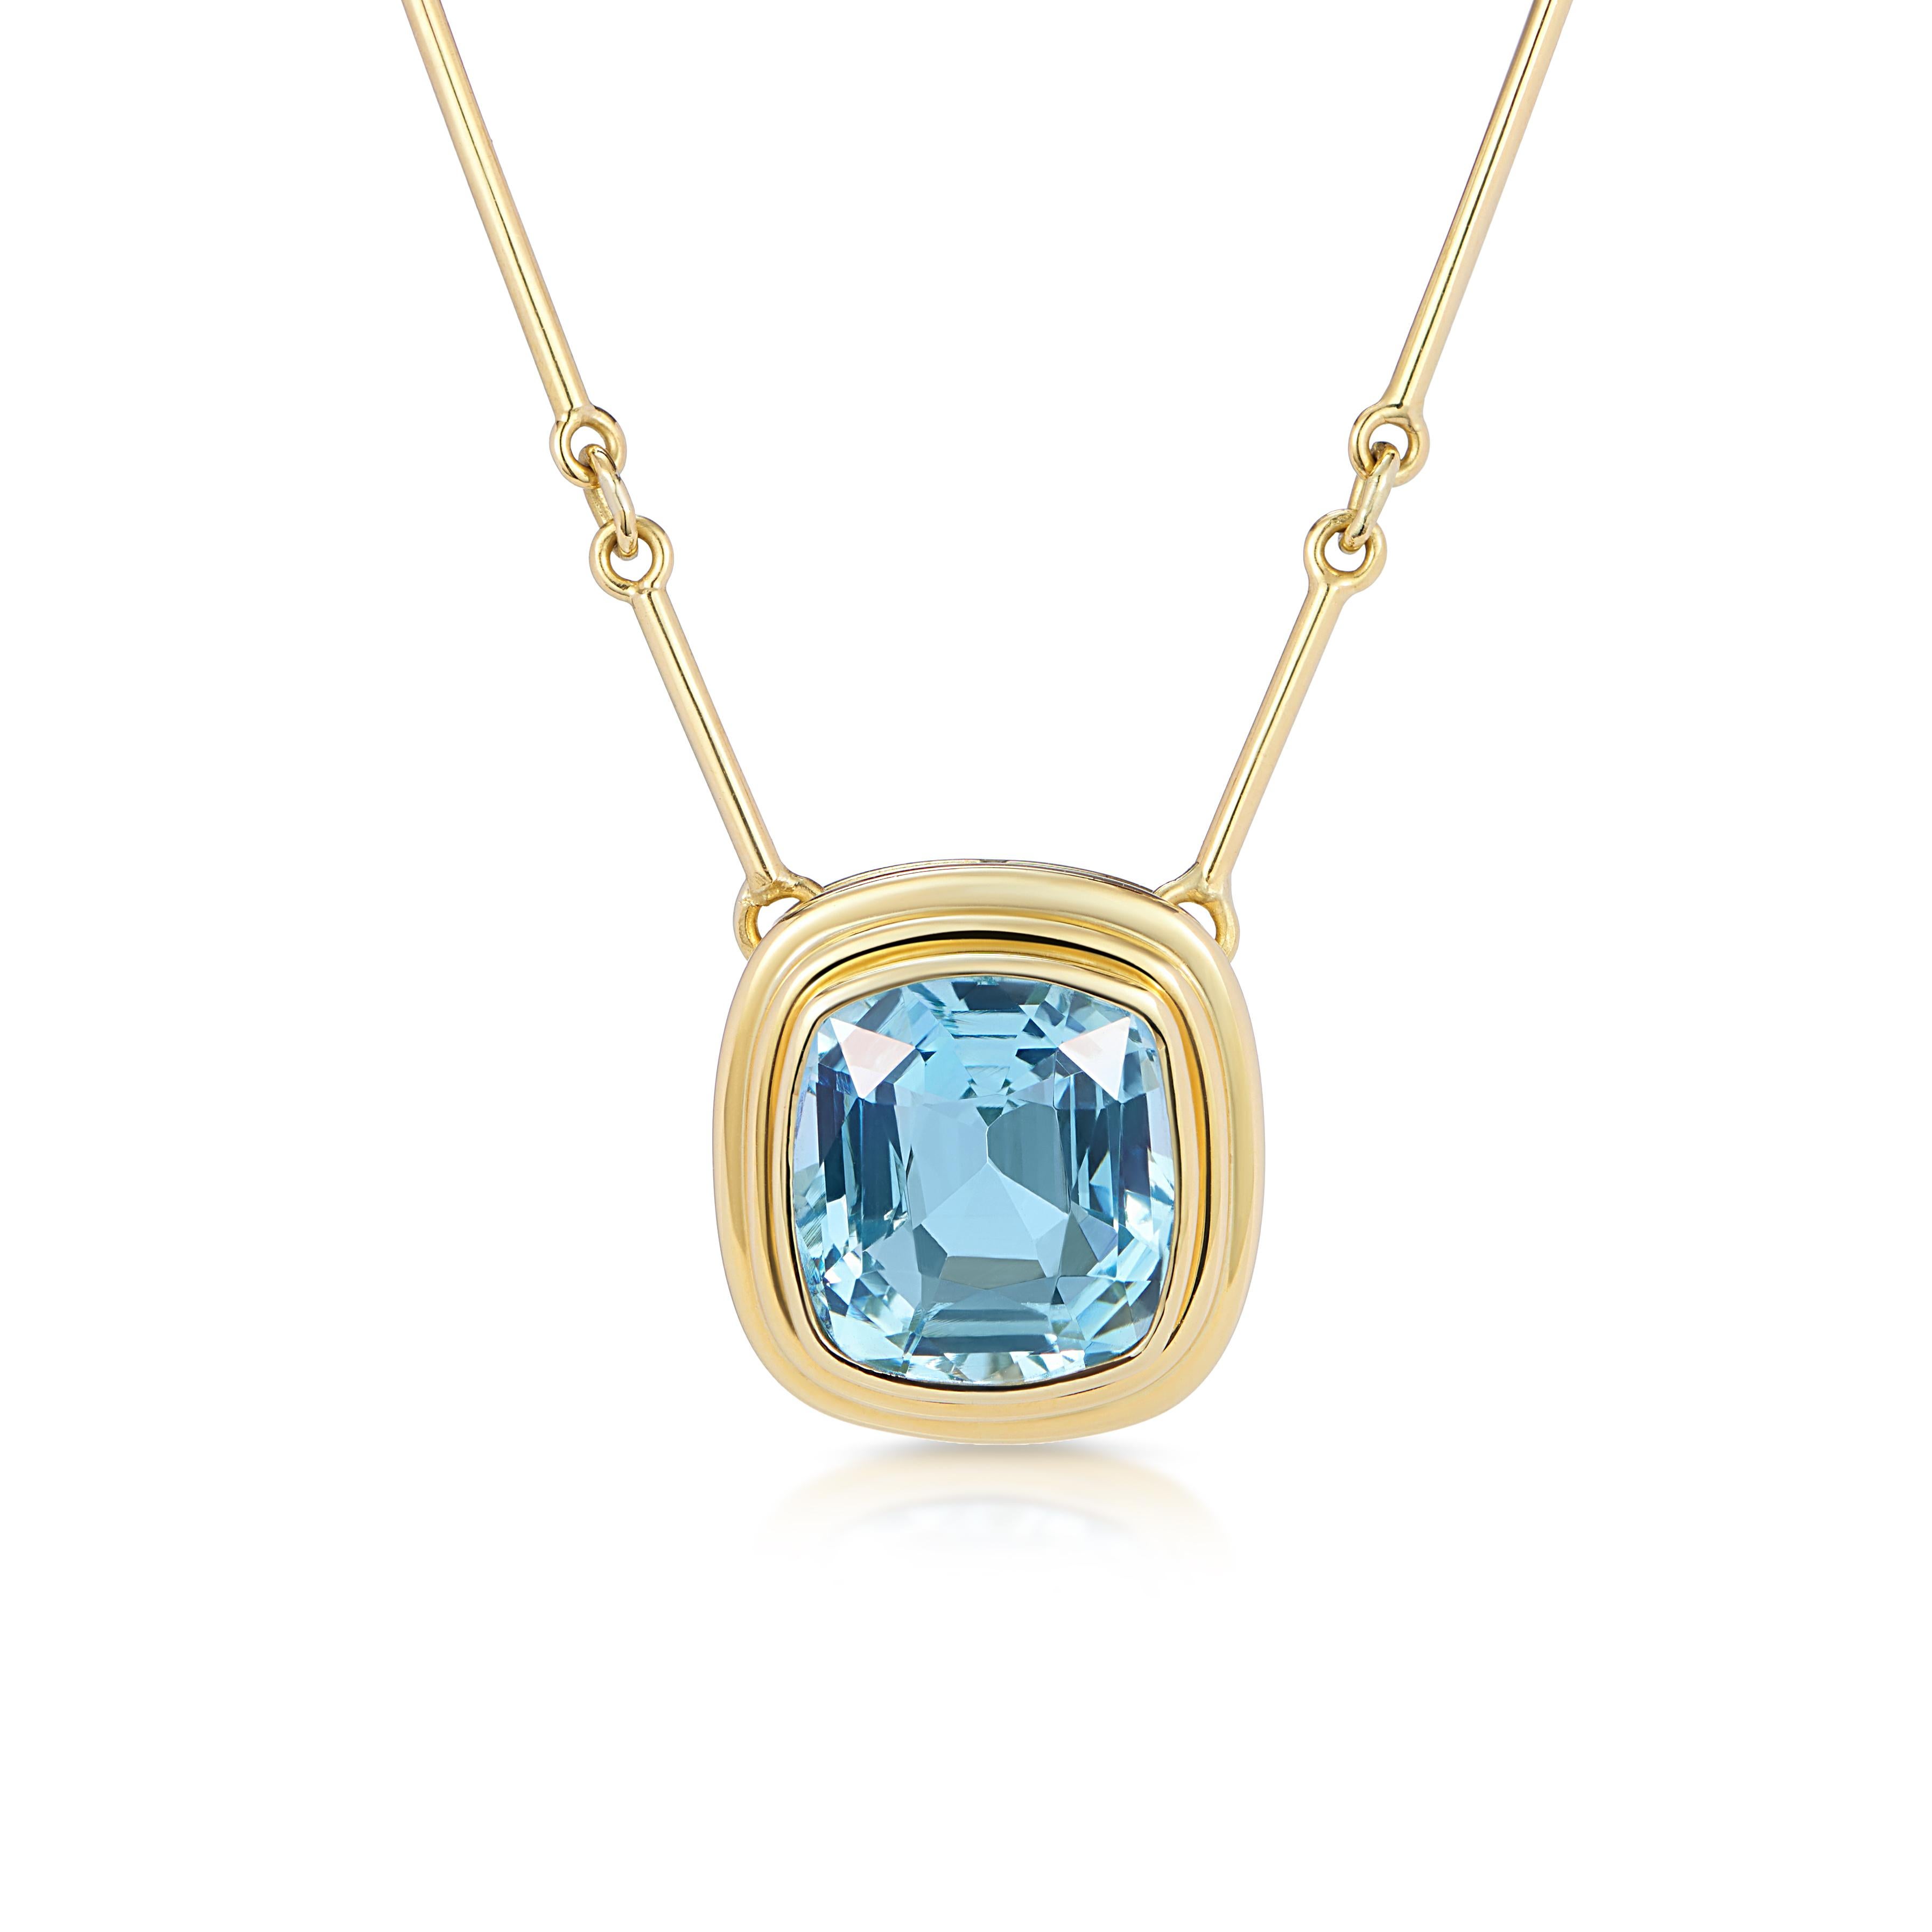 Certified 6.97 Carat Aquamarine Statement Necklace with 18 inch Gold Bar Chain For Sale 3